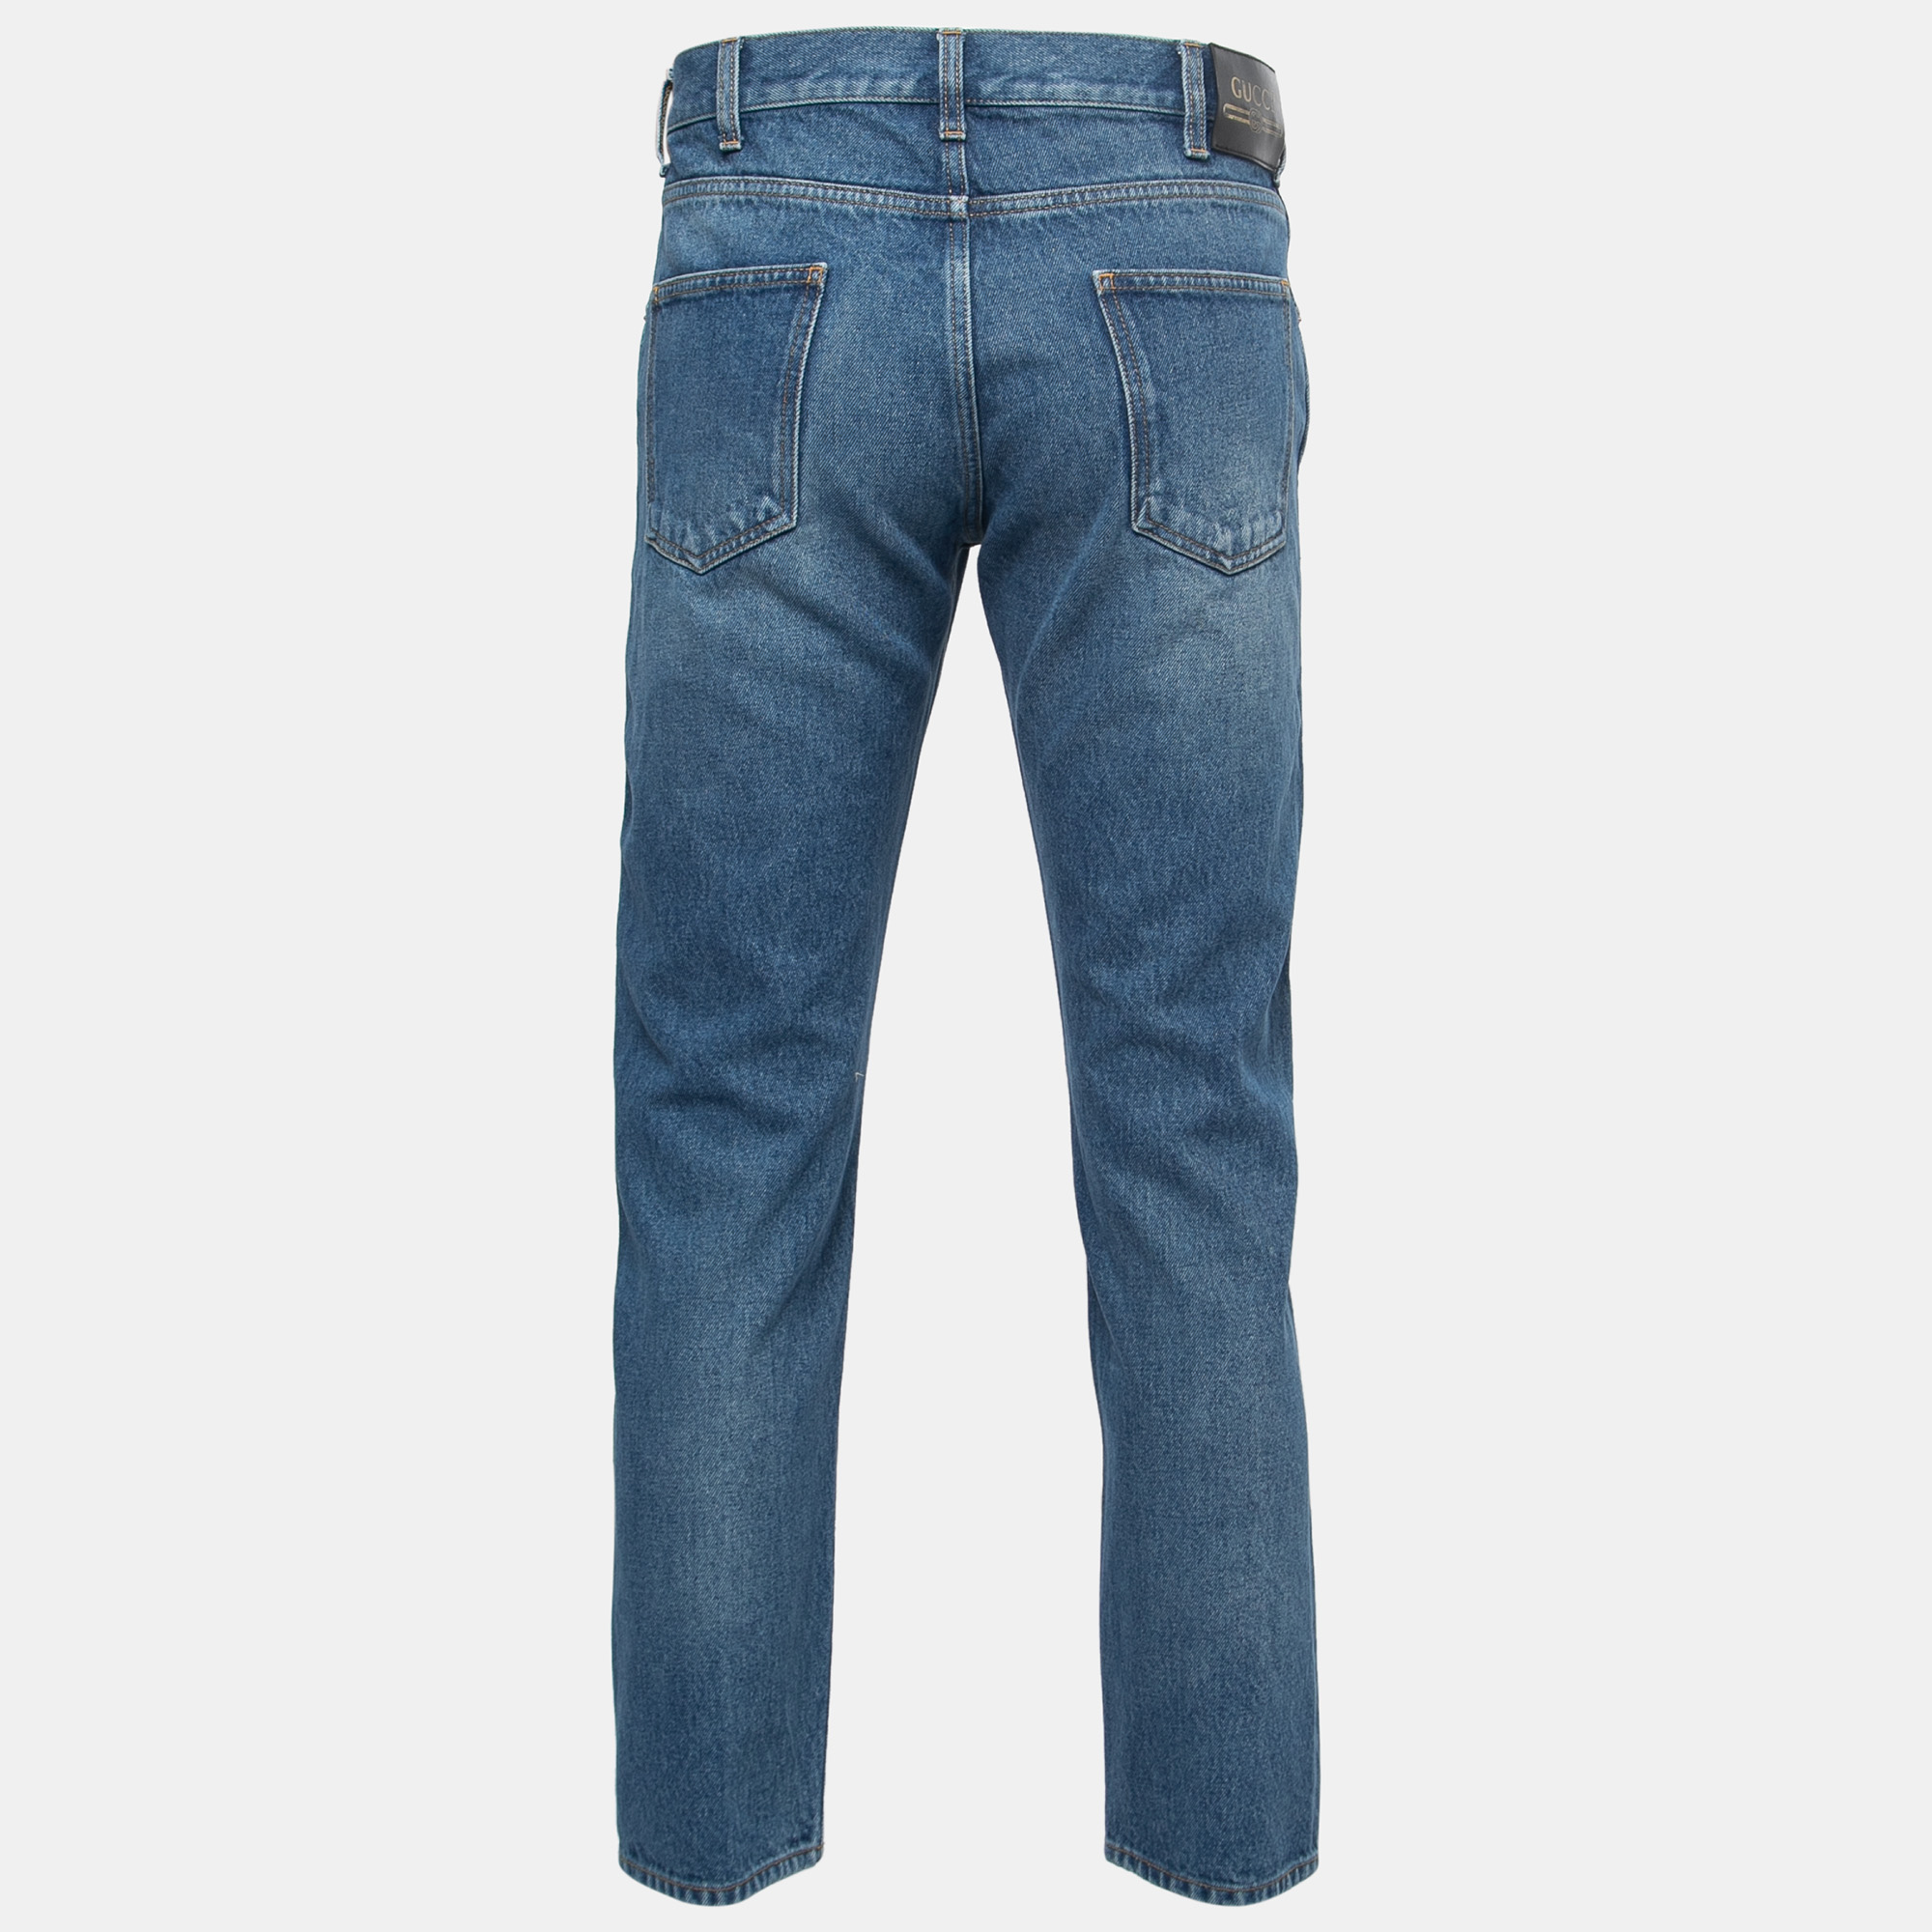 

Gucci Blue Light Wash Tapered Jeans  / Waist 35